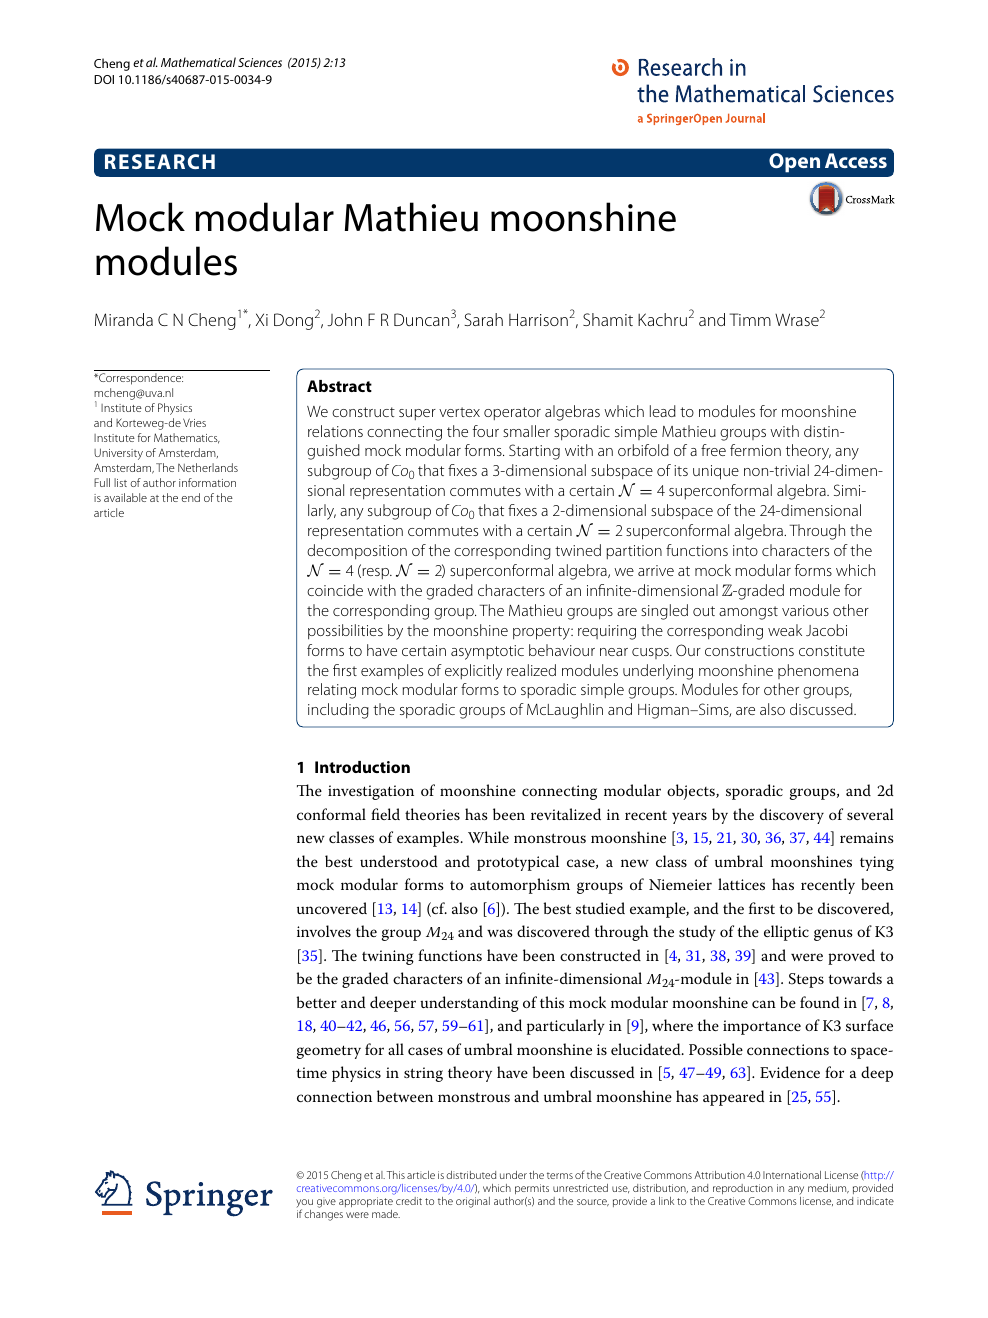 Mock Modular Mathieu Moonshine Modules Topic Of Research Paper In Physical Sciences Download Scholarly Article Pdf And Read For Free On Cyberleninka Open Science Hub